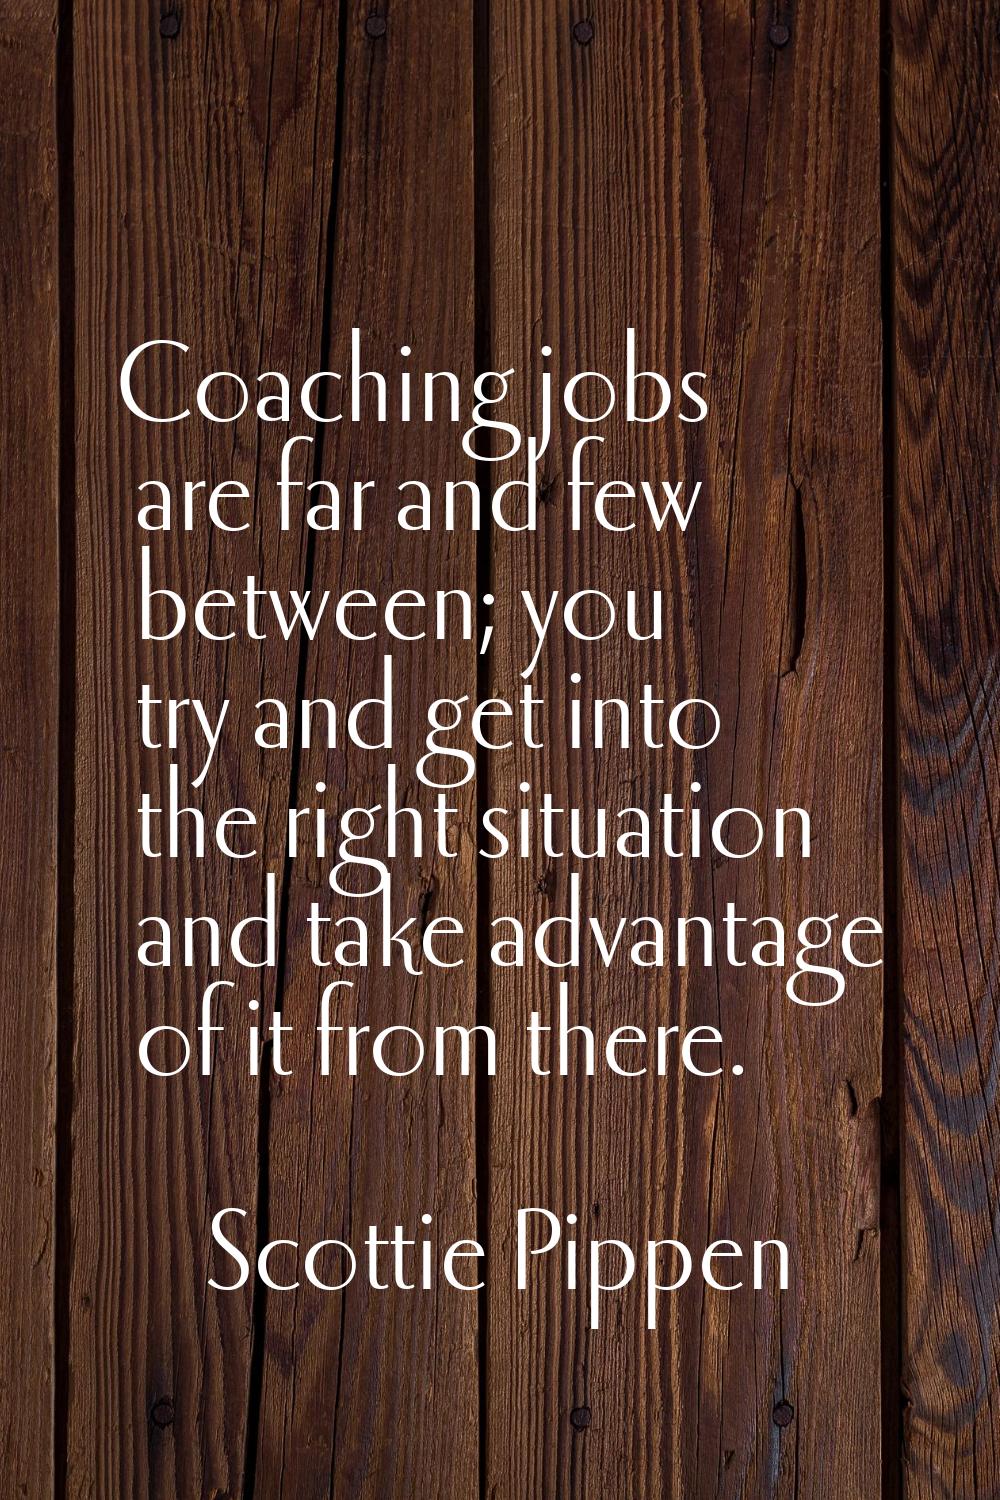 Coaching jobs are far and few between; you try and get into the right situation and take advantage 